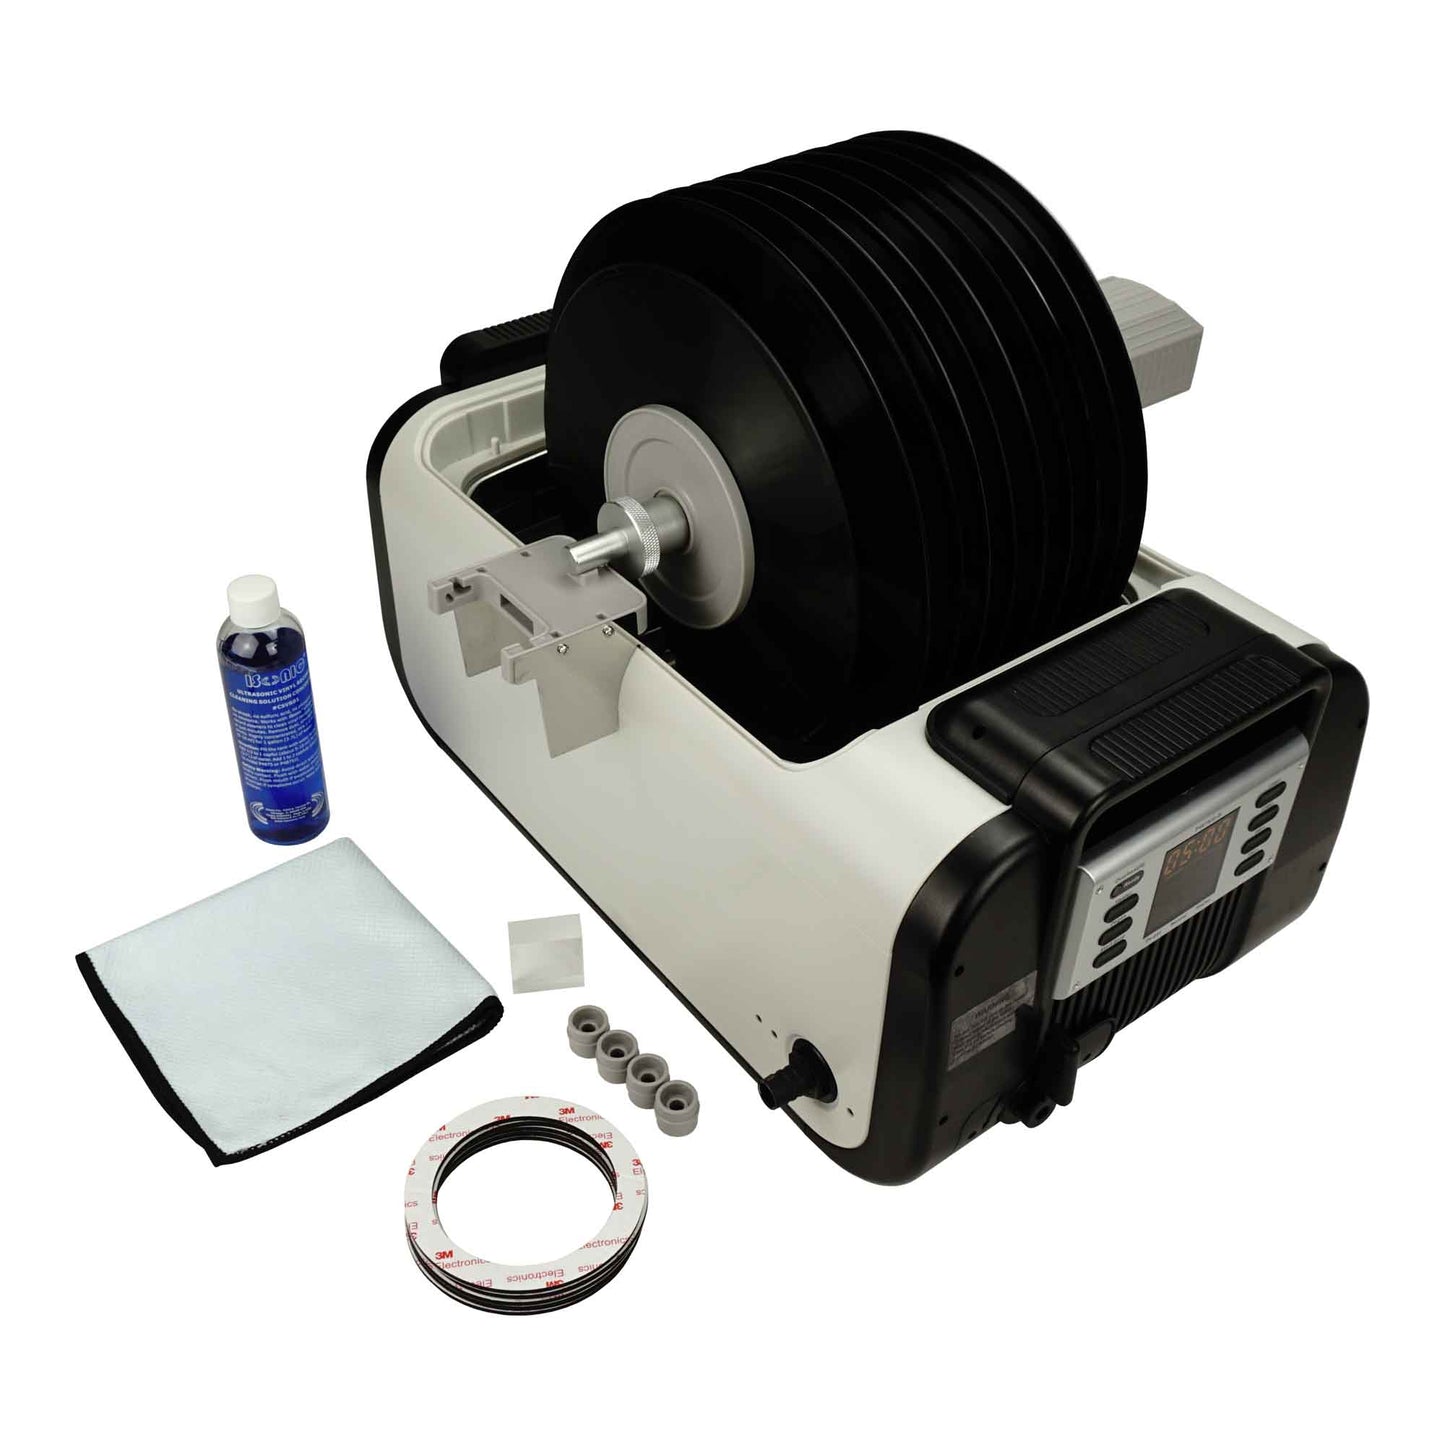 P4875II+MVR10 | iSonic® Ultrasonic Vinyl Record Cleaner for 10-LPs, 2Gal/7.5L with heaters